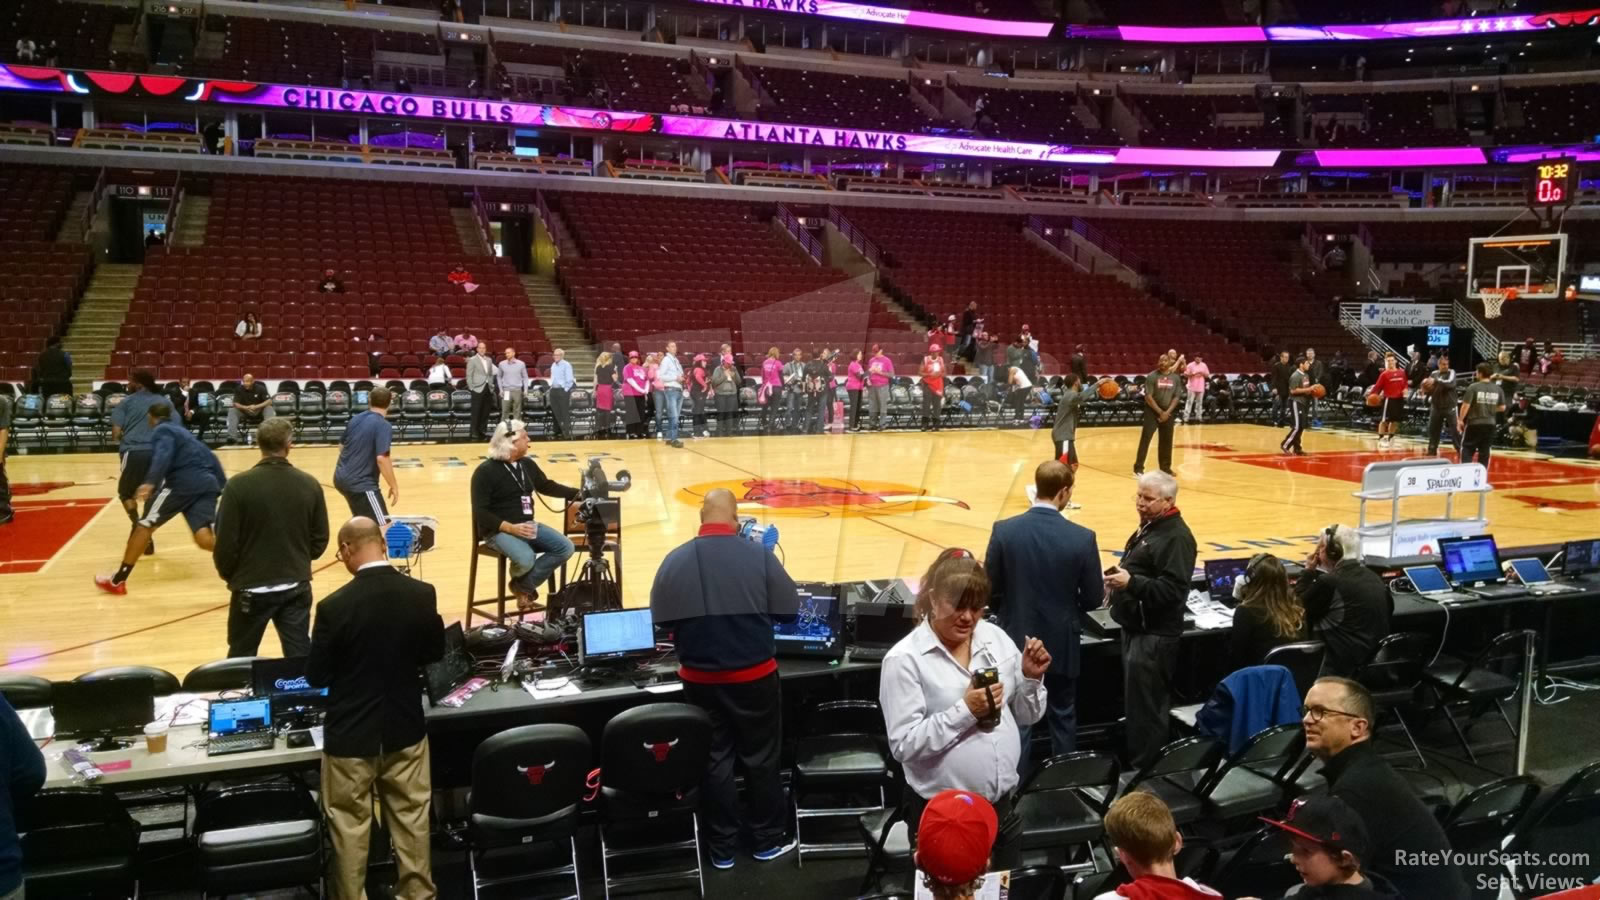 Section 101 at United Center - RateYourSeats.com